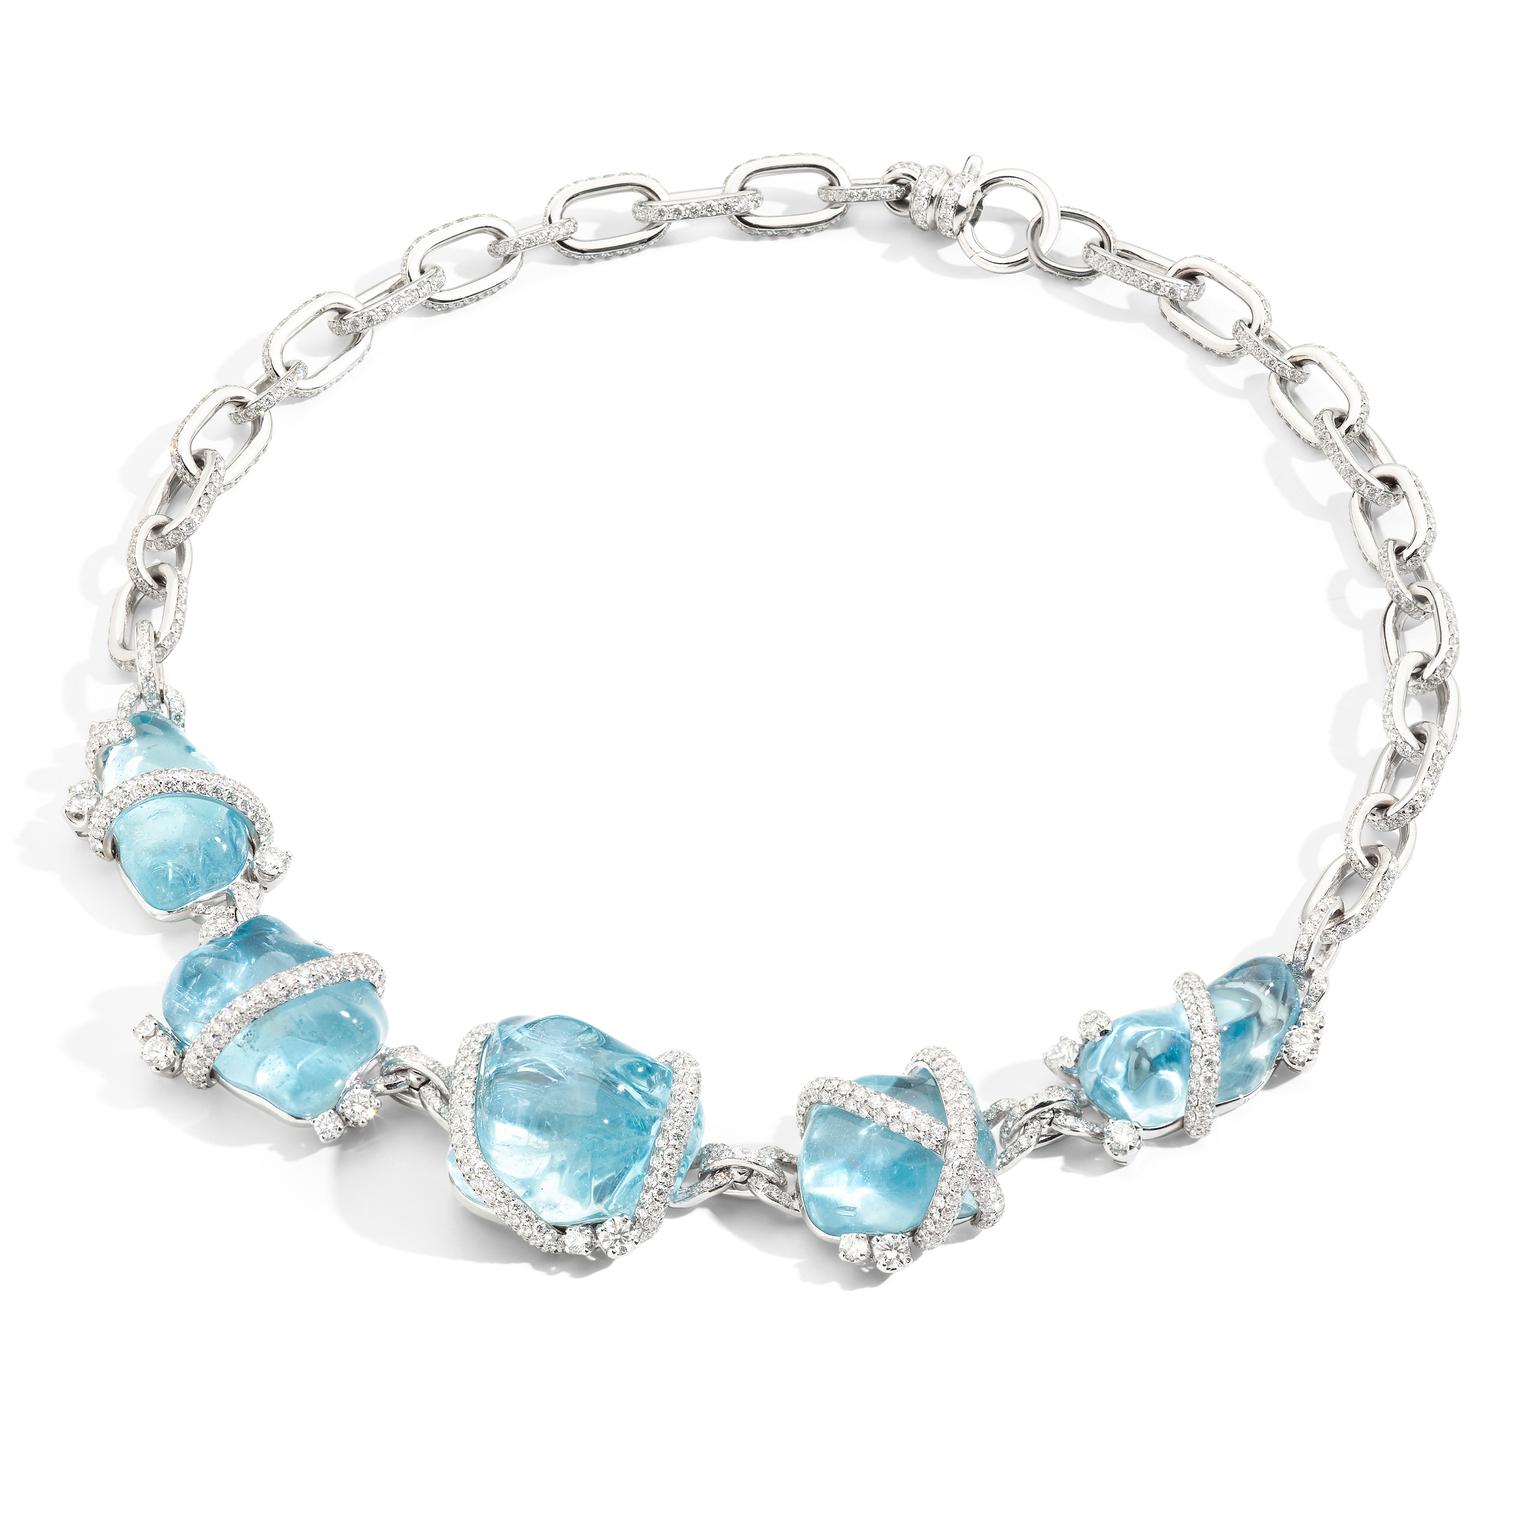 Secret of the Rising Sun Blue Reef Riviere necklace by Pomellato